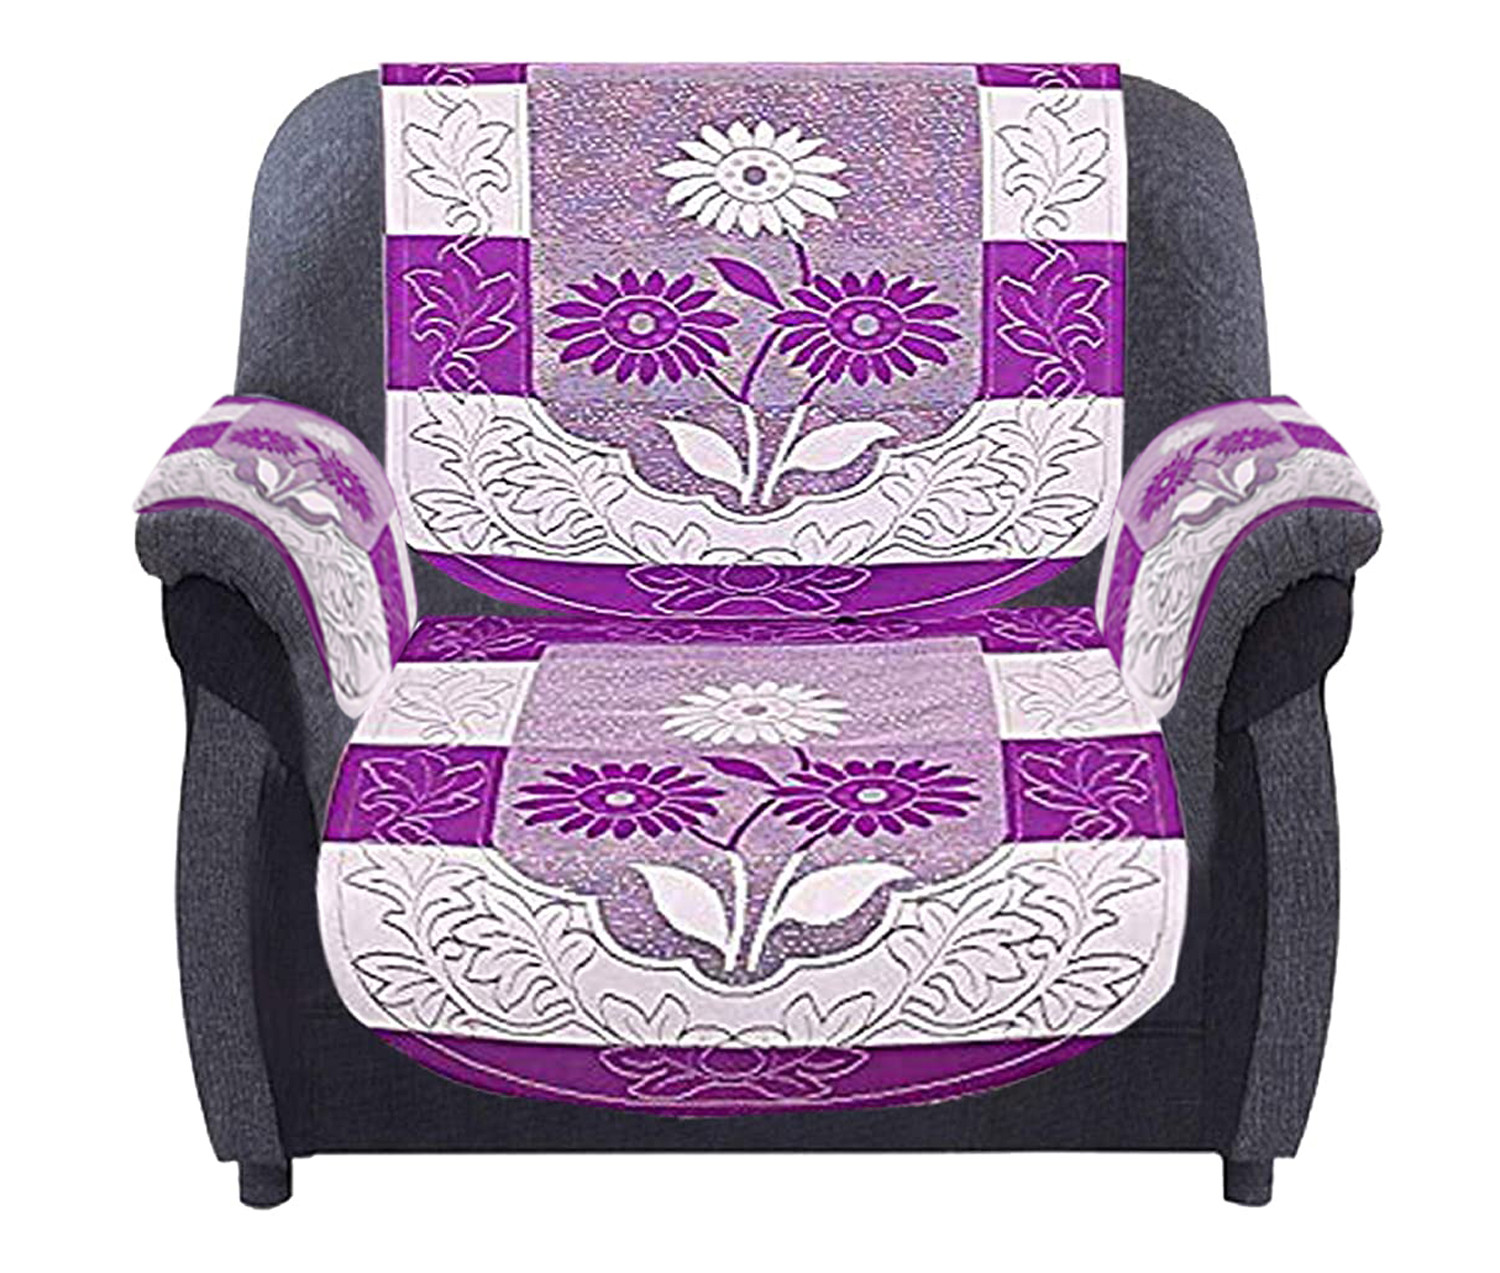 Kuber Industries Flower Design Cotton 5 Seater Sofa Cover With 6 Pieces Arms cover Use Both Side, Living Room, Drawing Room, Bedroom, Guest Room (Set Of16, Purple)-KUBMRT11967